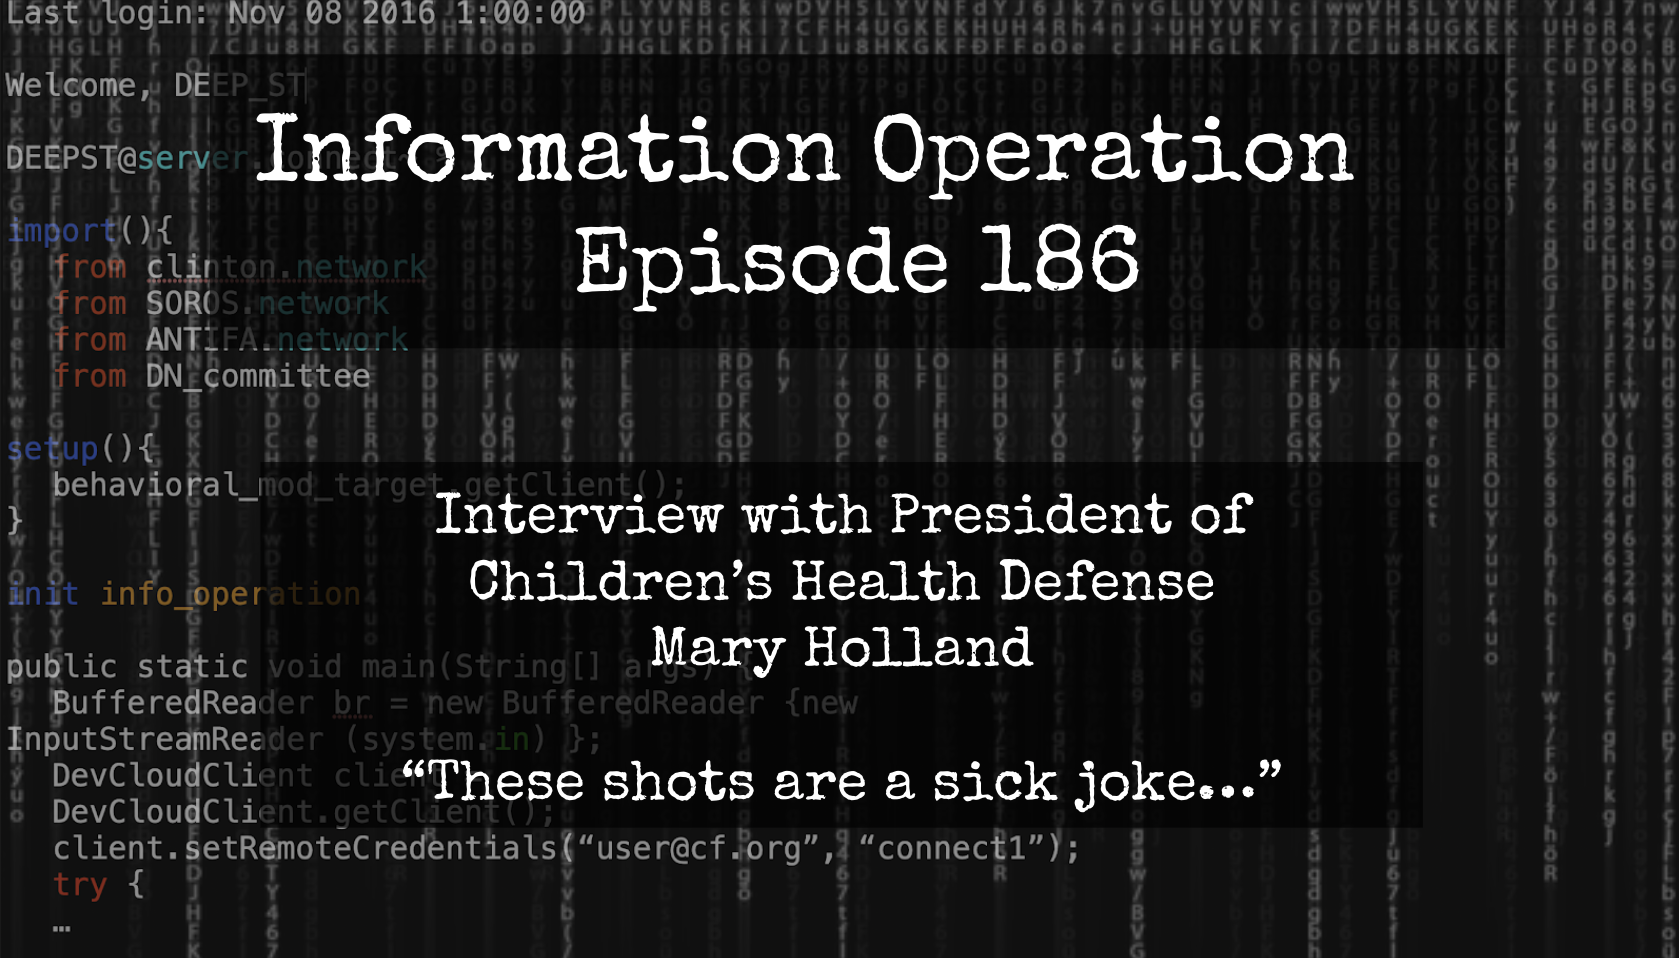 LIVE 9:30am EST - Mary Holland, President CHD - These Shots Are A Sick Joke